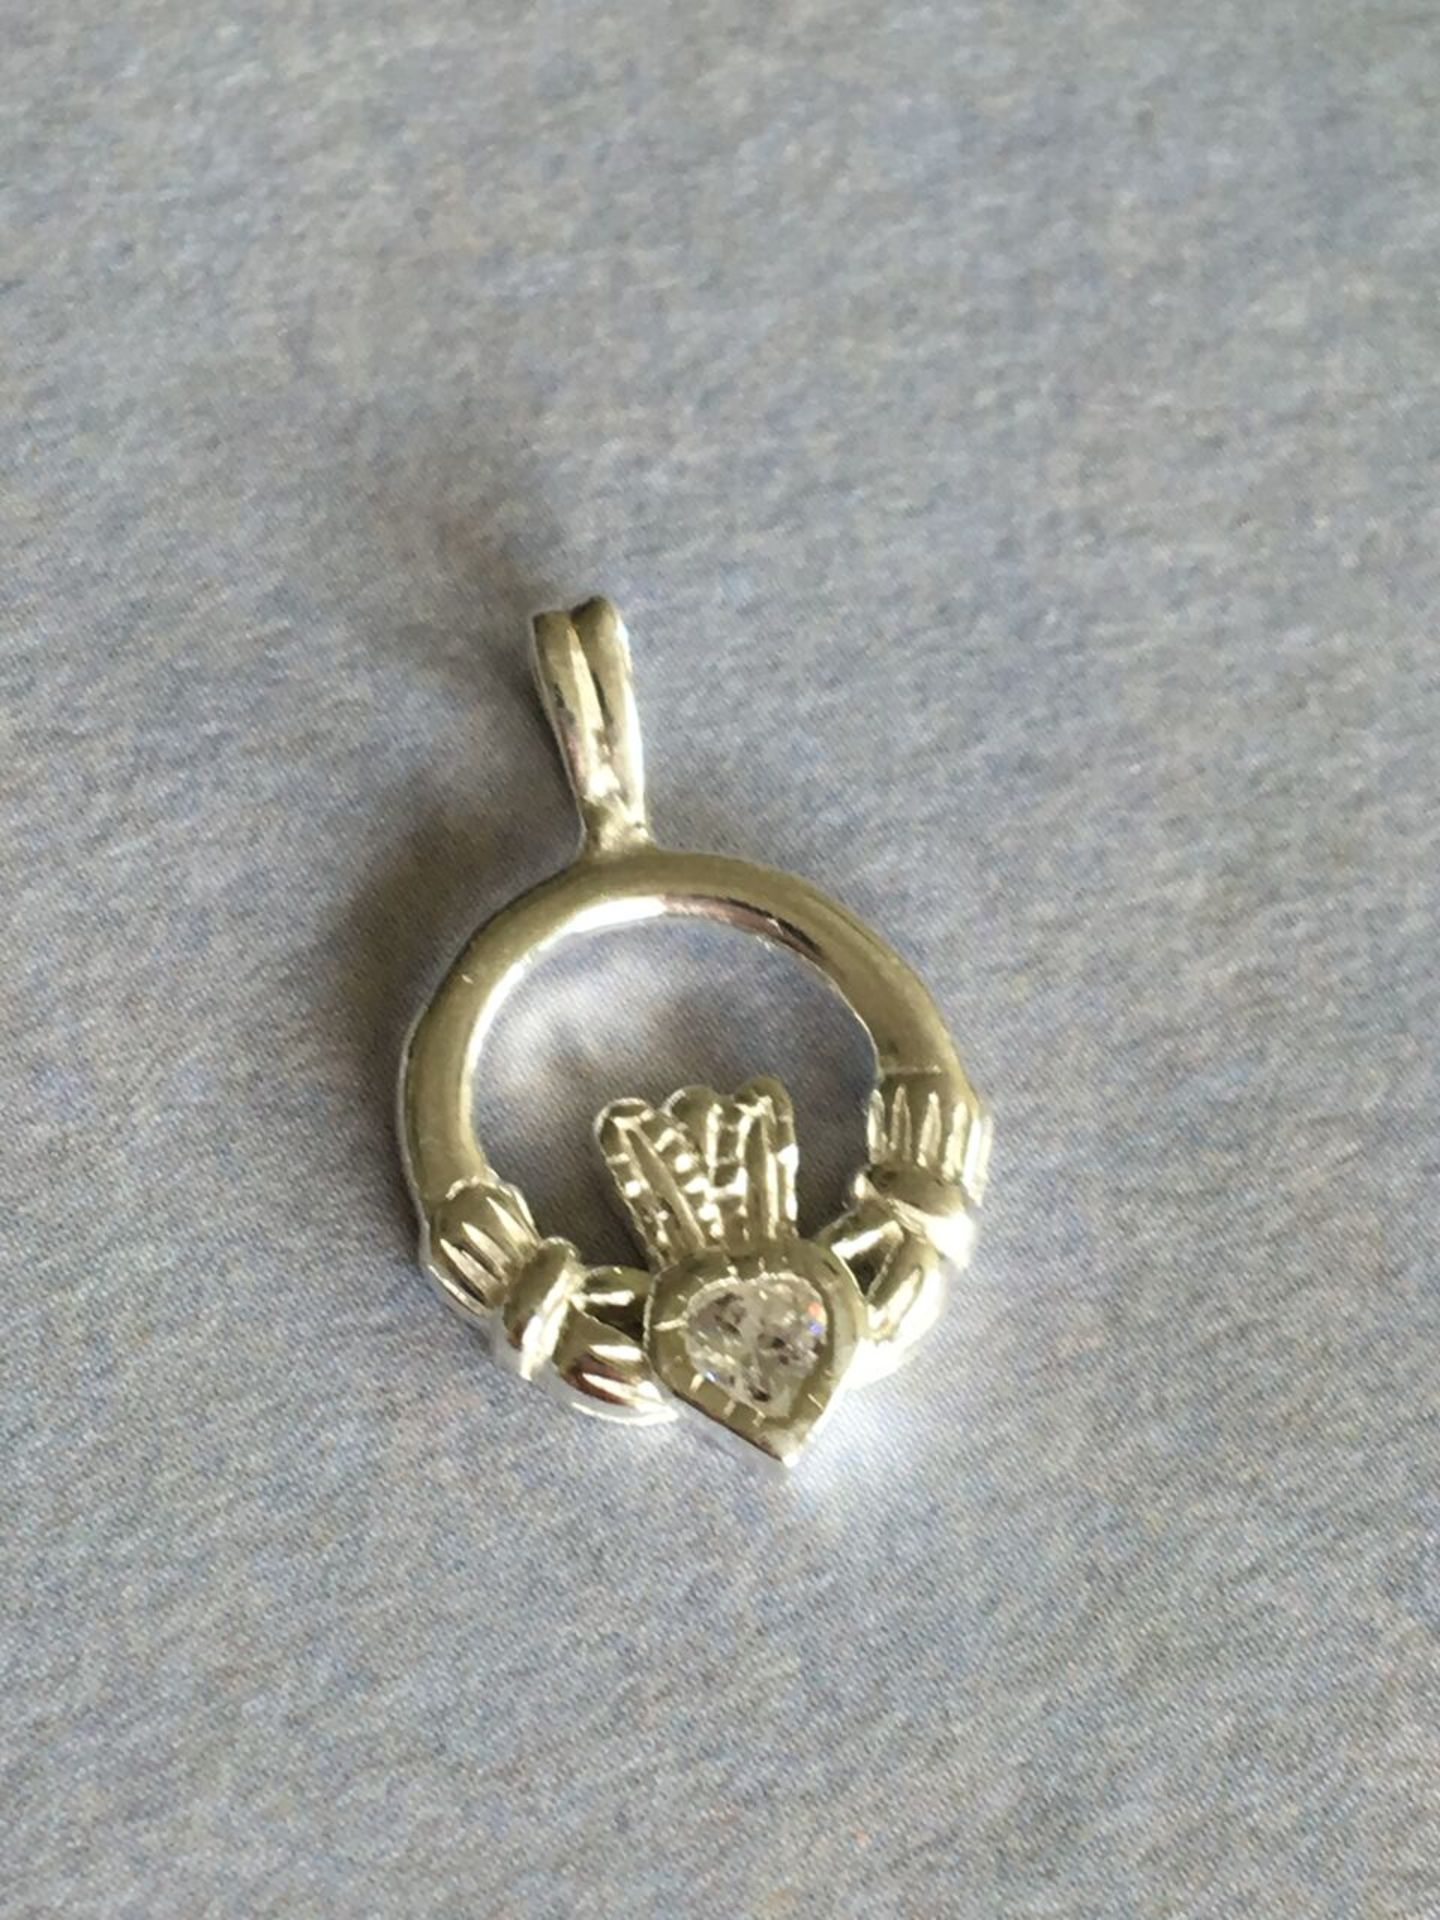 STERLING SILVER (STAMPED 925) IRISH CLADDAGH PENDANT. FREE UK DELIVERY. NO VAT.